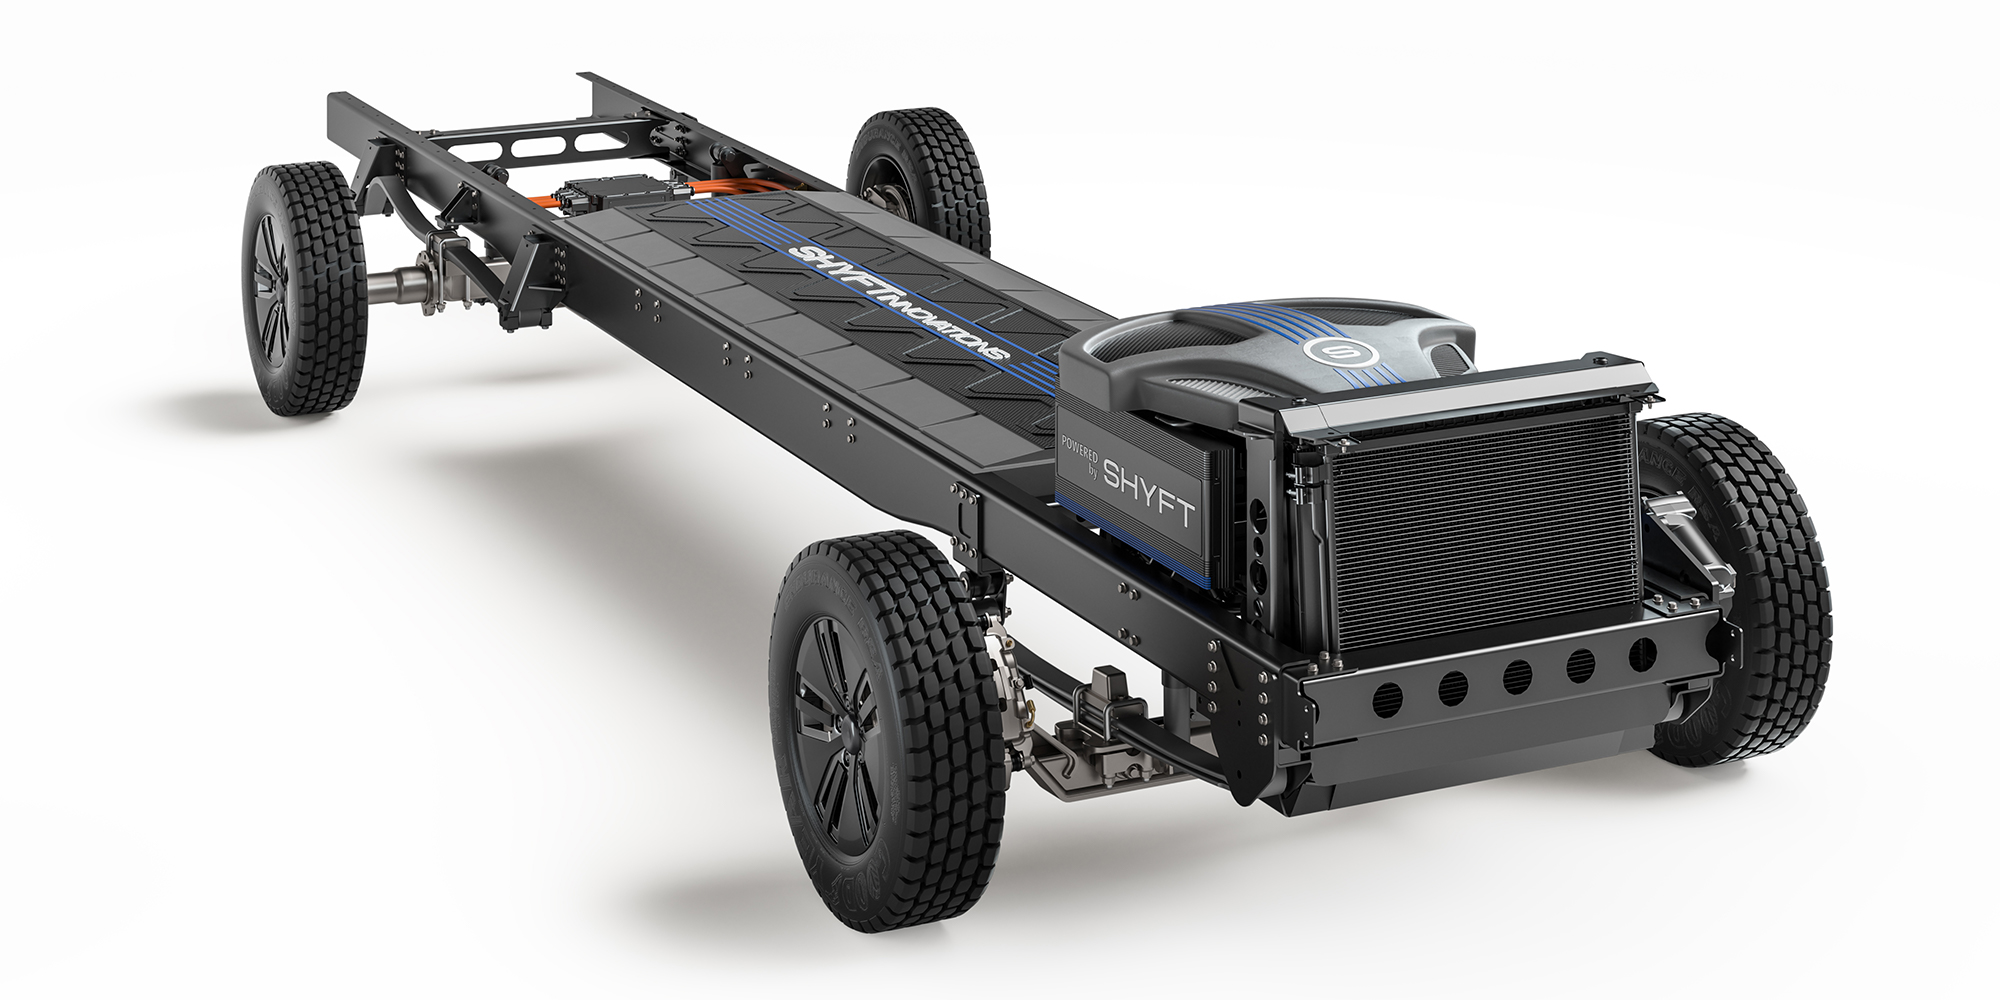 The Shyft Group introduces fully electric, purposebuilt chassis